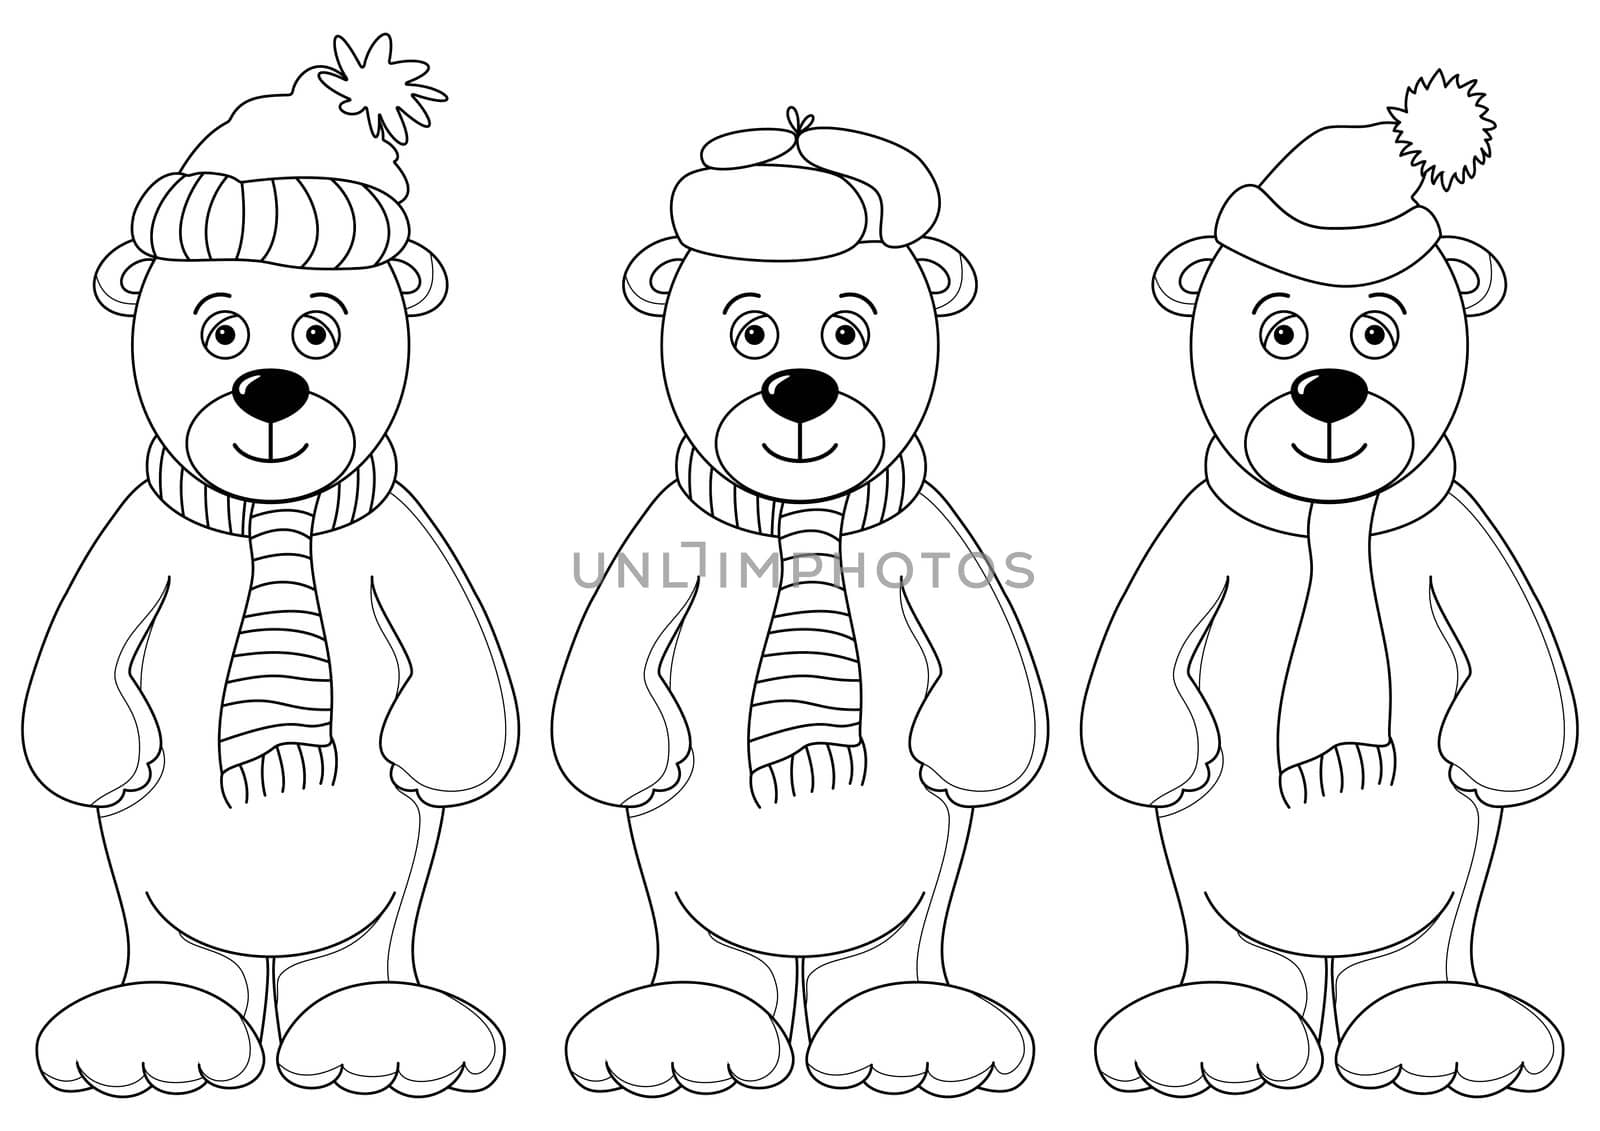 Teddy bears in winter cap and scarf, friends, contours